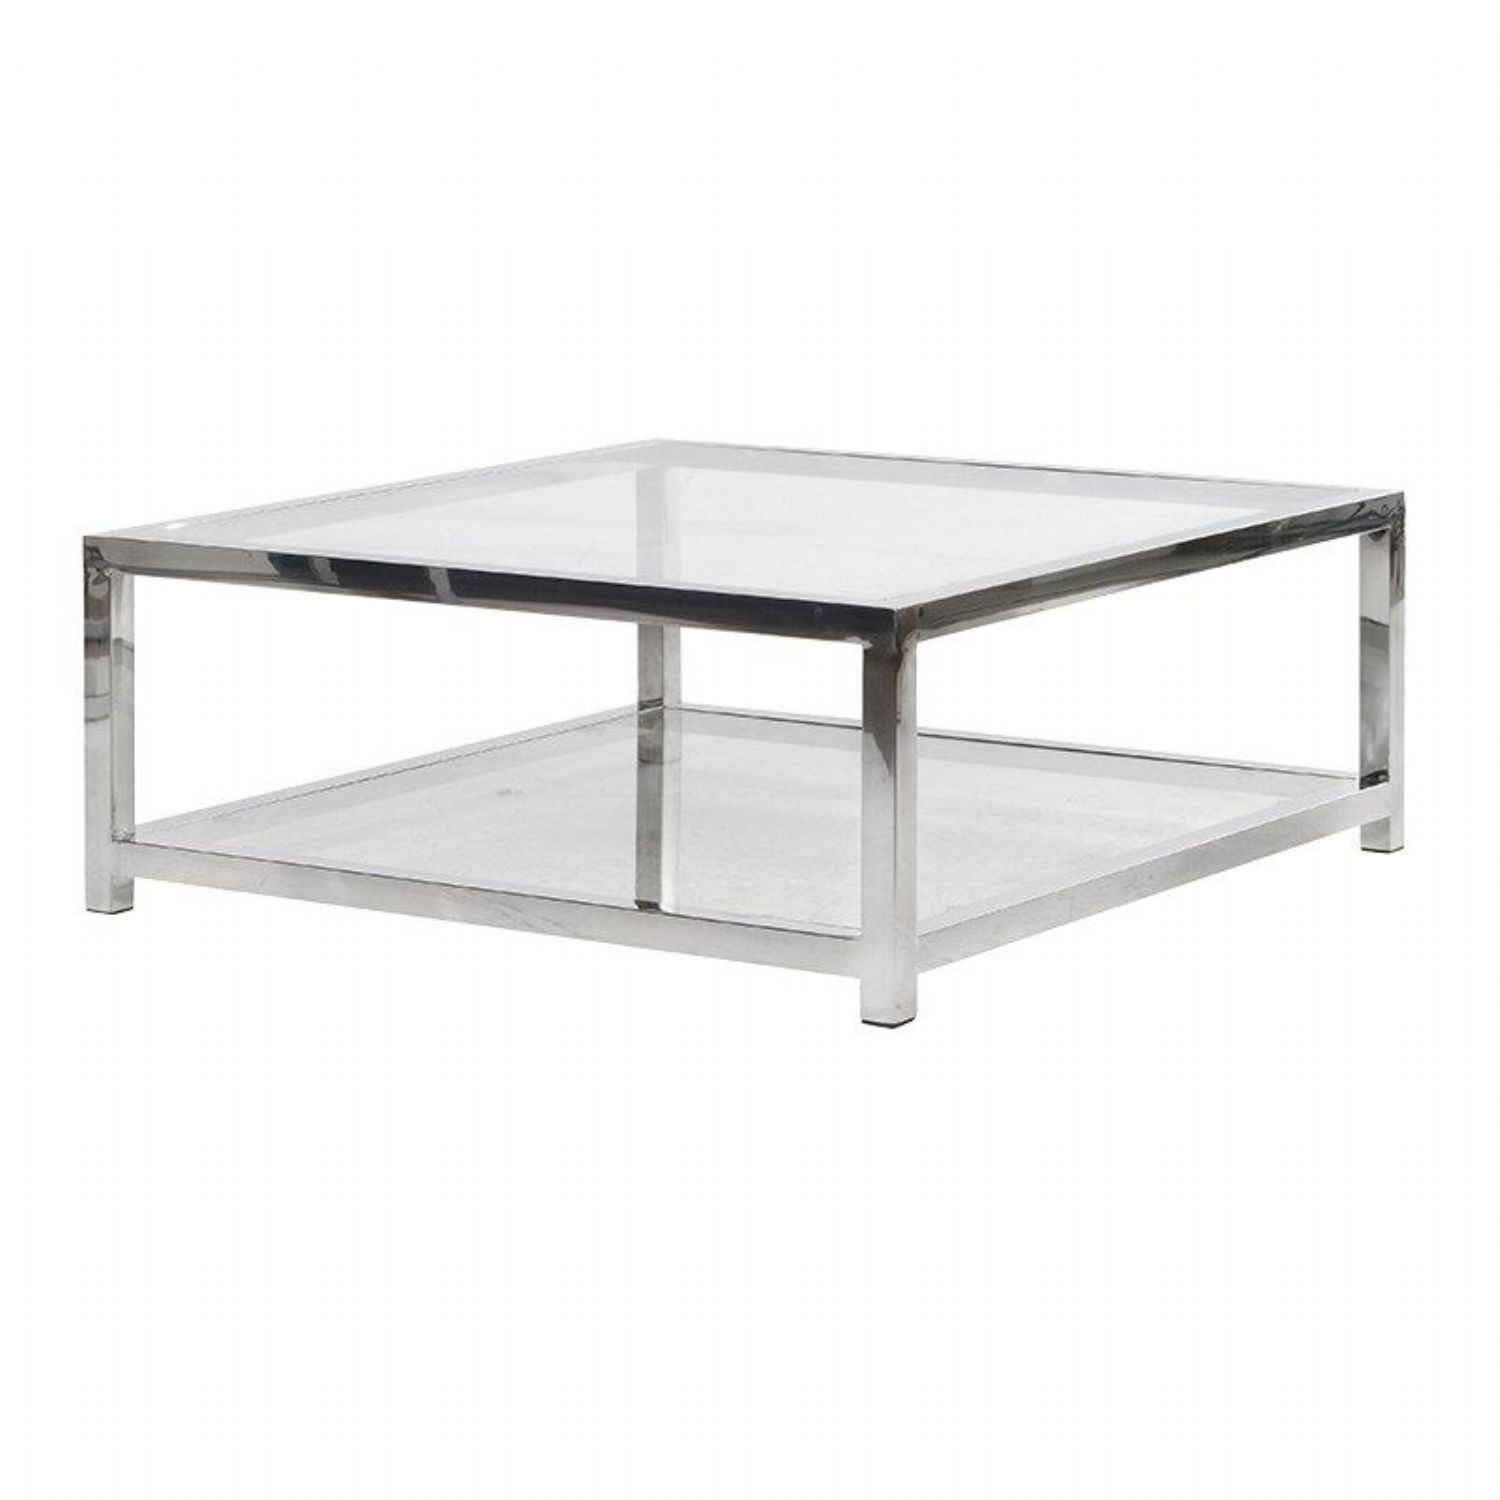 Terano contemporary metal and glass top square coffee